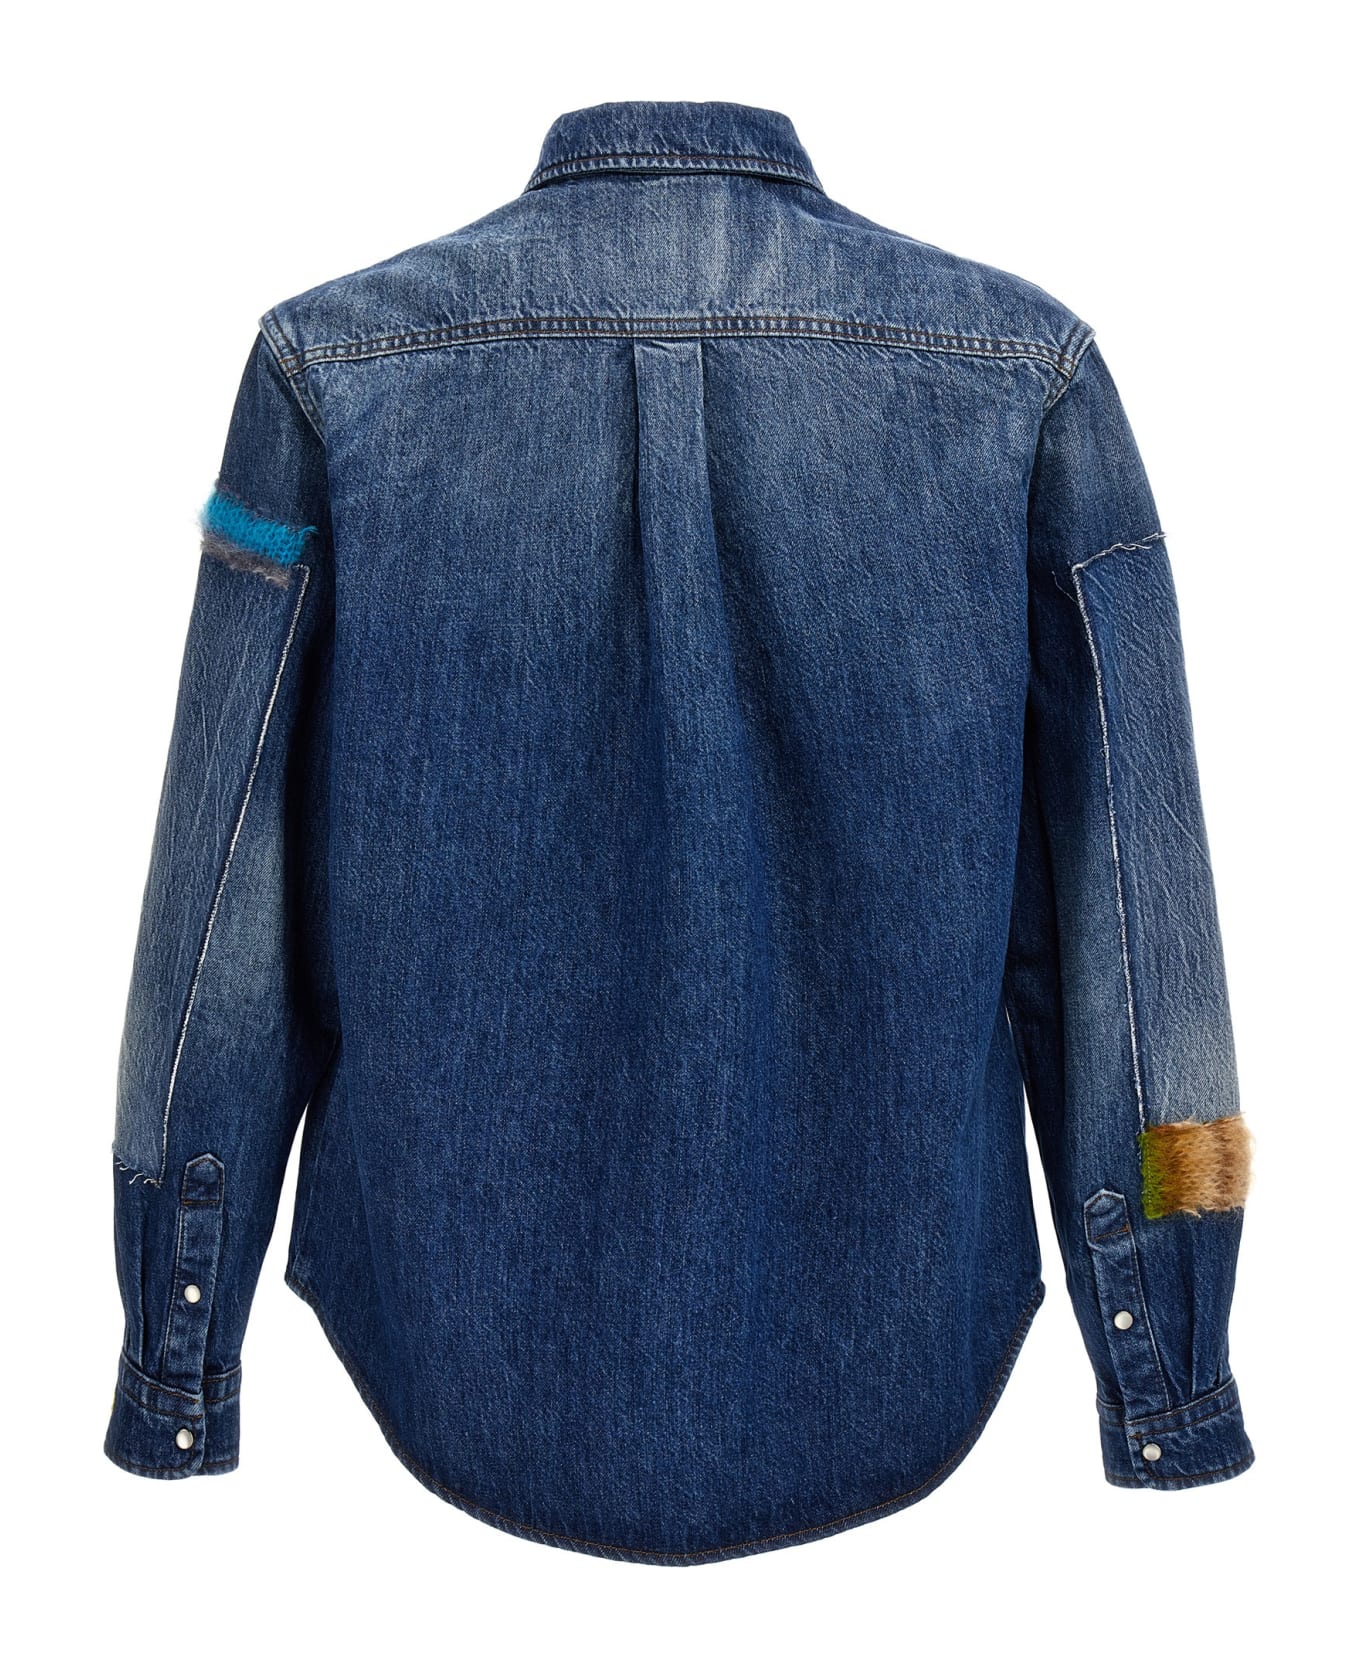 Marni Denim Shirt, Embroidery And Patches - BLUE/MULTICOLOUR シャツ